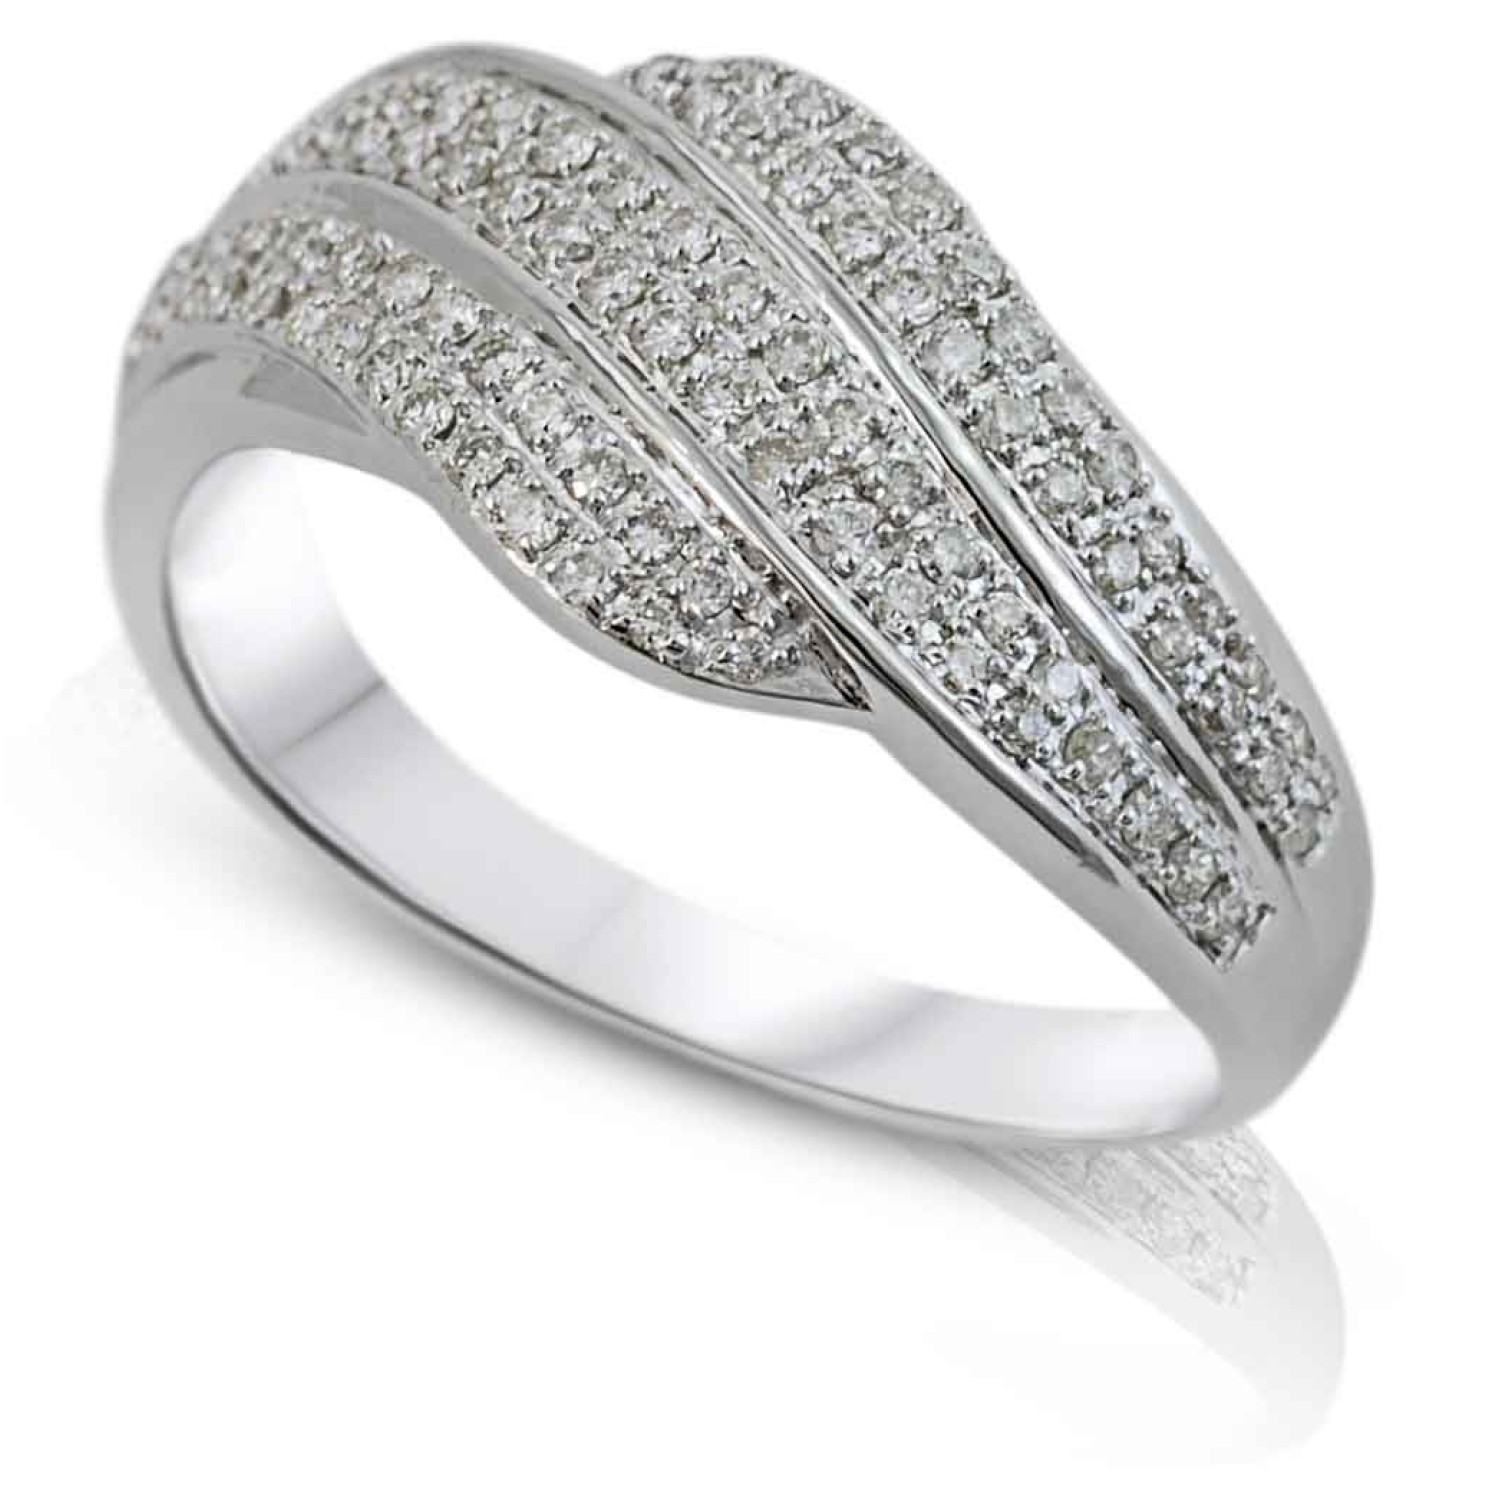 9ct Diamond White Gold Ring 0.28ct TDW. This diamond ring in White Gold features 0.26ct in diamonds and is available in store at Christies Papatoetoe or online LAYBUY - Pay it easy, in 6 weekly payments and have it now. Only pay the price of your purchase